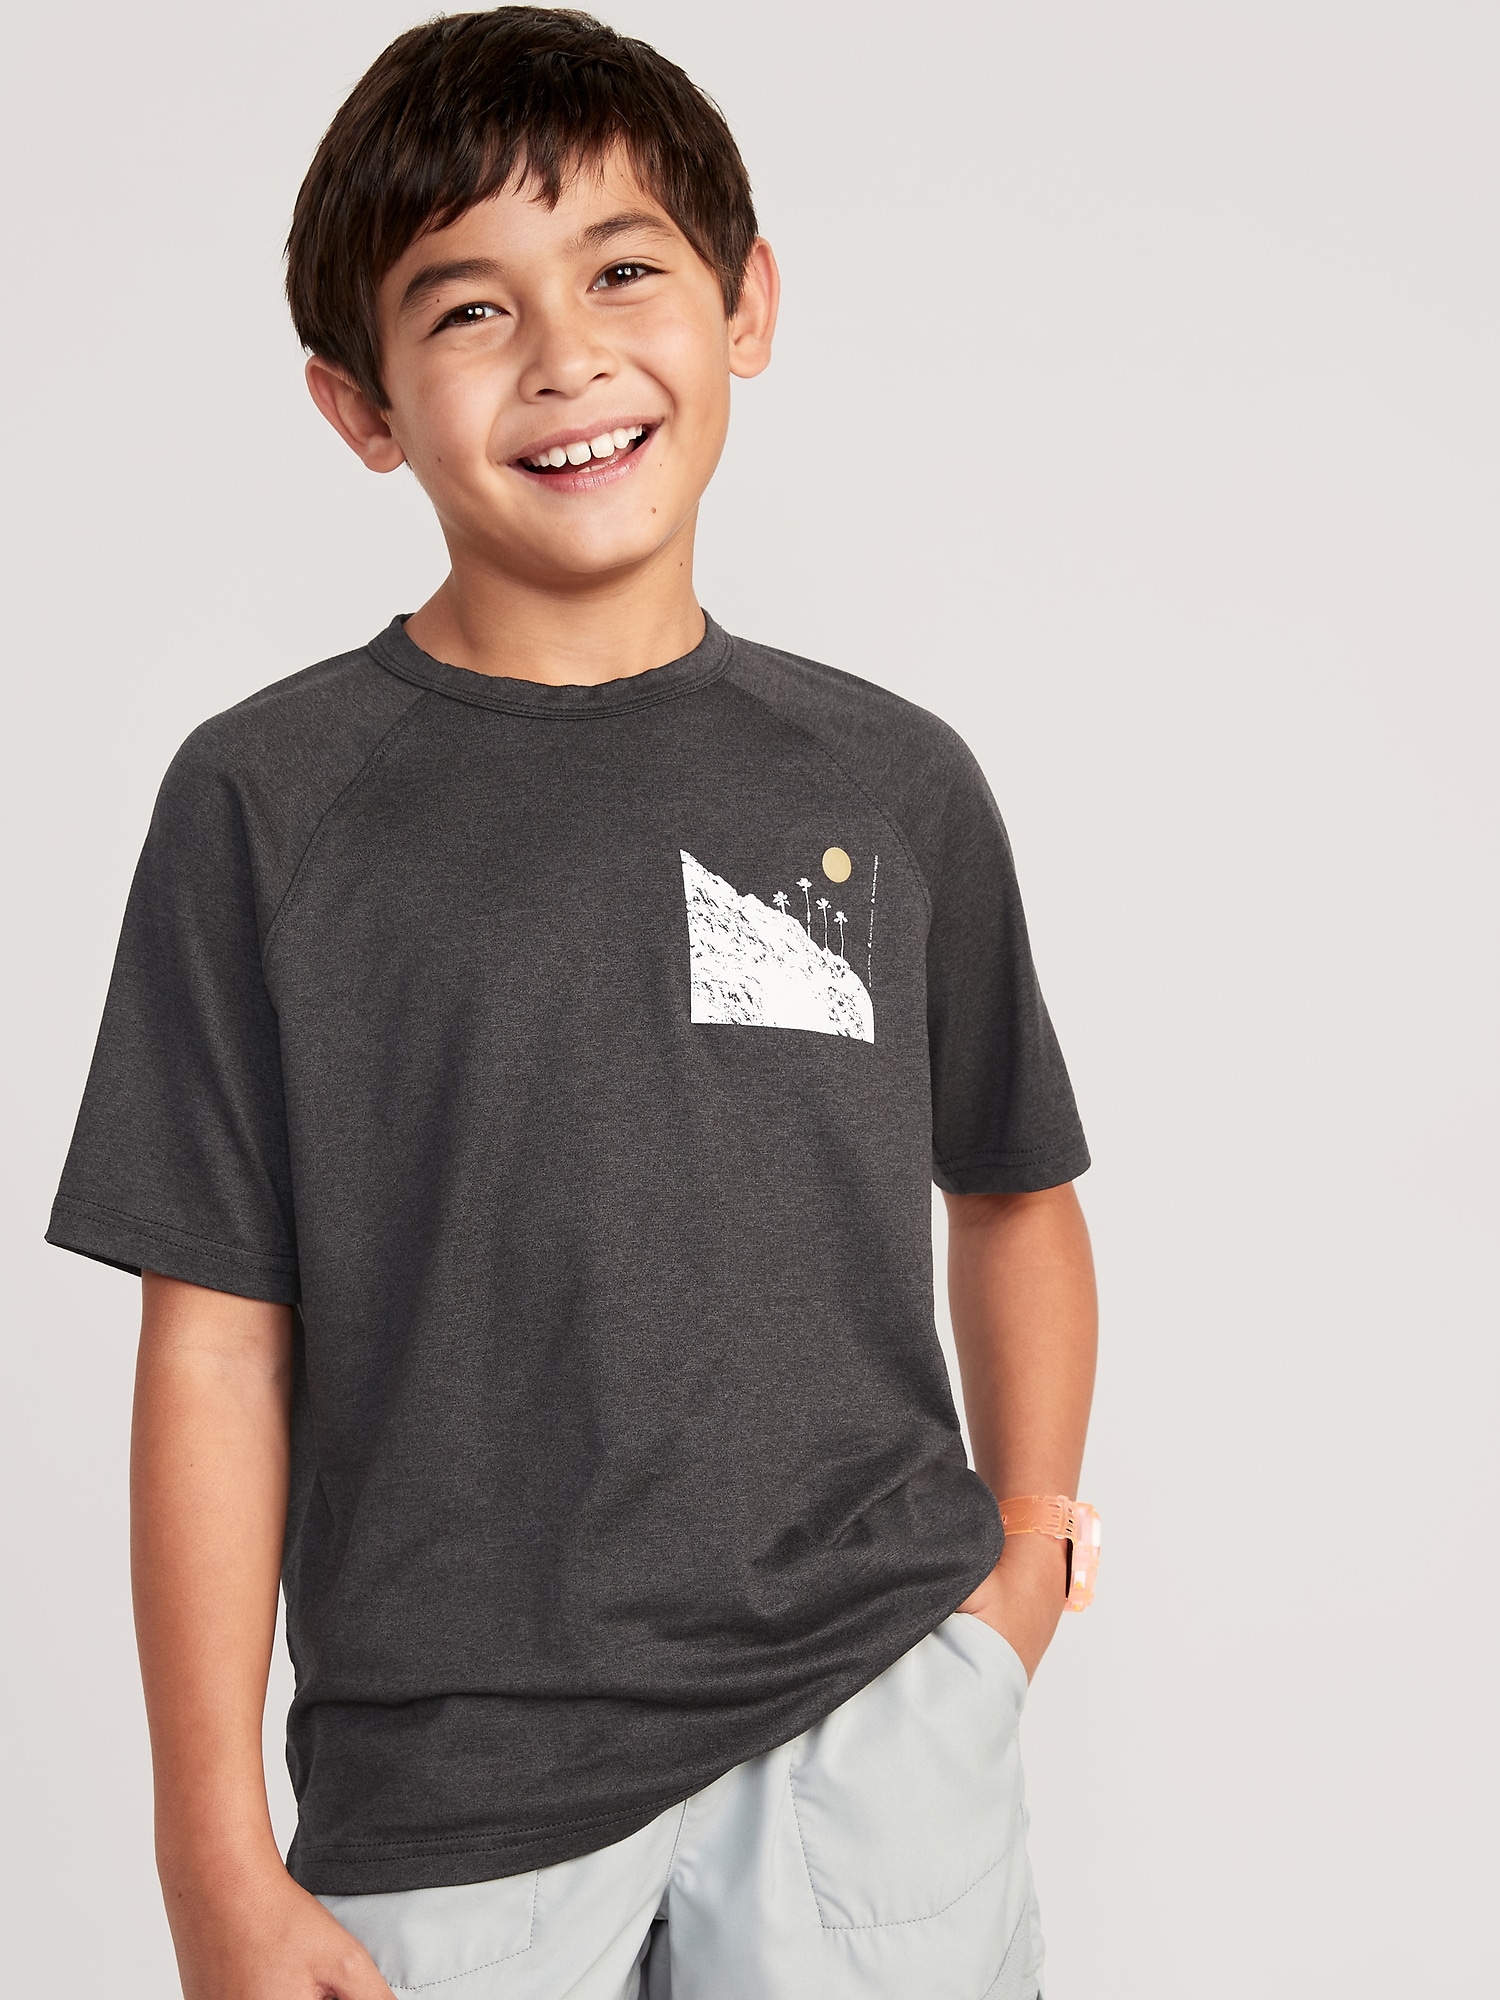 Old Navy Cloud 94 Soft Go-Dry Cool Graphic Performance T-Shirt for Boys black. 1